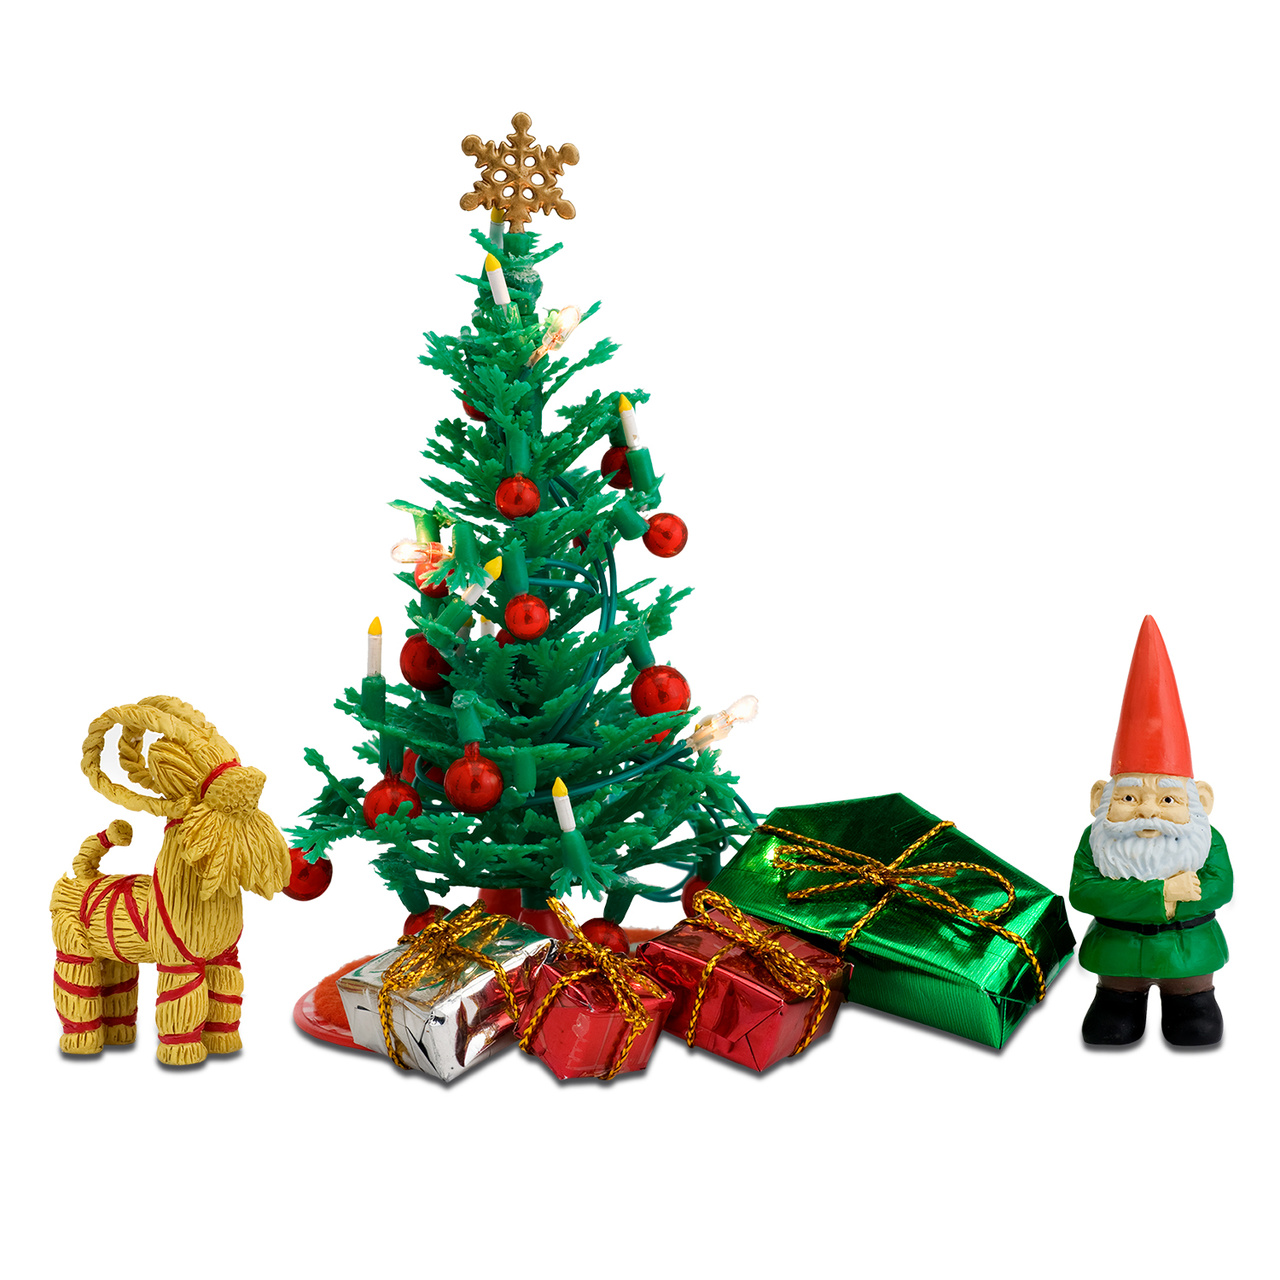 Doll house lighting lundby dollhouse accessories christmas set with lighting